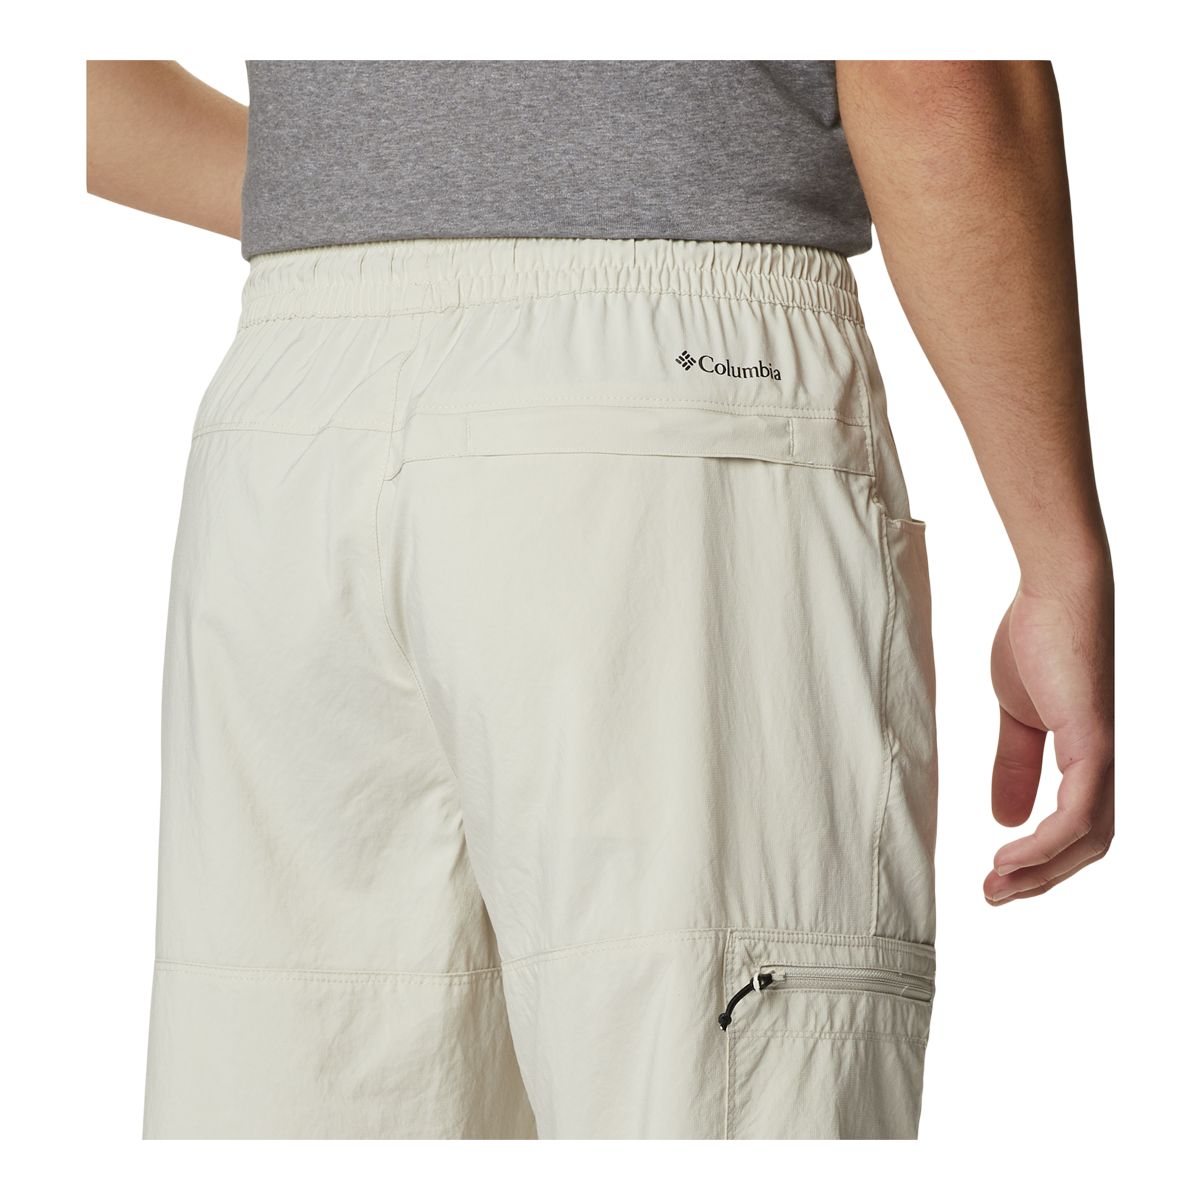 https://media-www.sportchek.ca/product/div-03-softgoods/dpt-72-casual-clothing/sdpt-01-mens/334038186/columbia-men-s-coral-ridge-pullon-pants-39539f0e-2ff5-41aa-8cbb-5a460bff3cb2-jpgrendition.jpg?imdensity=1&imwidth=1244&impolicy=mZoom